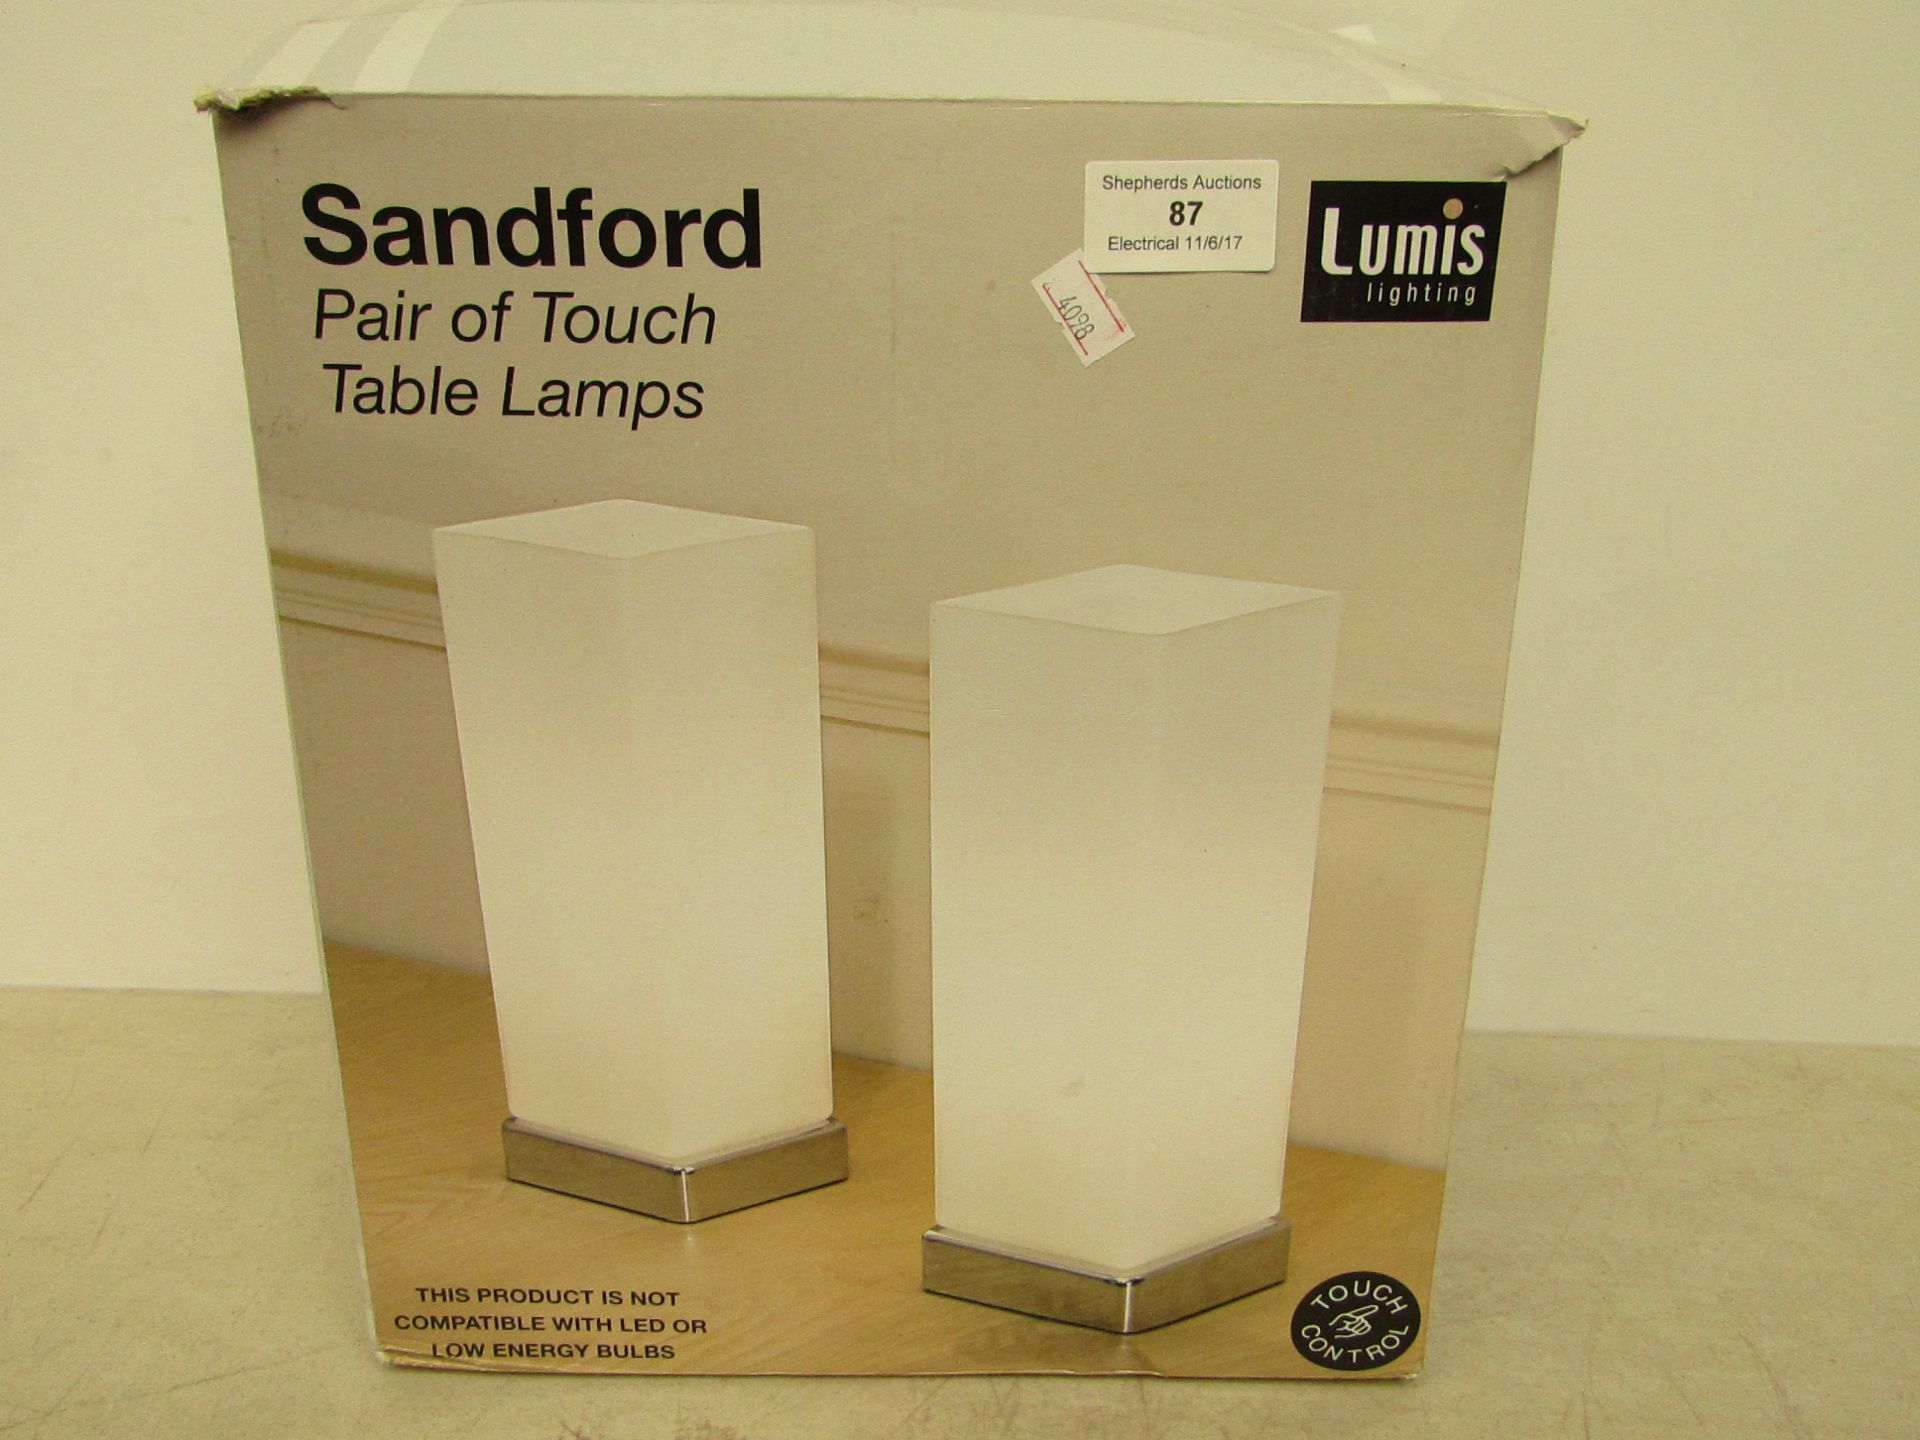 Sandford pair of touch table lamps, unchecked and boxed.